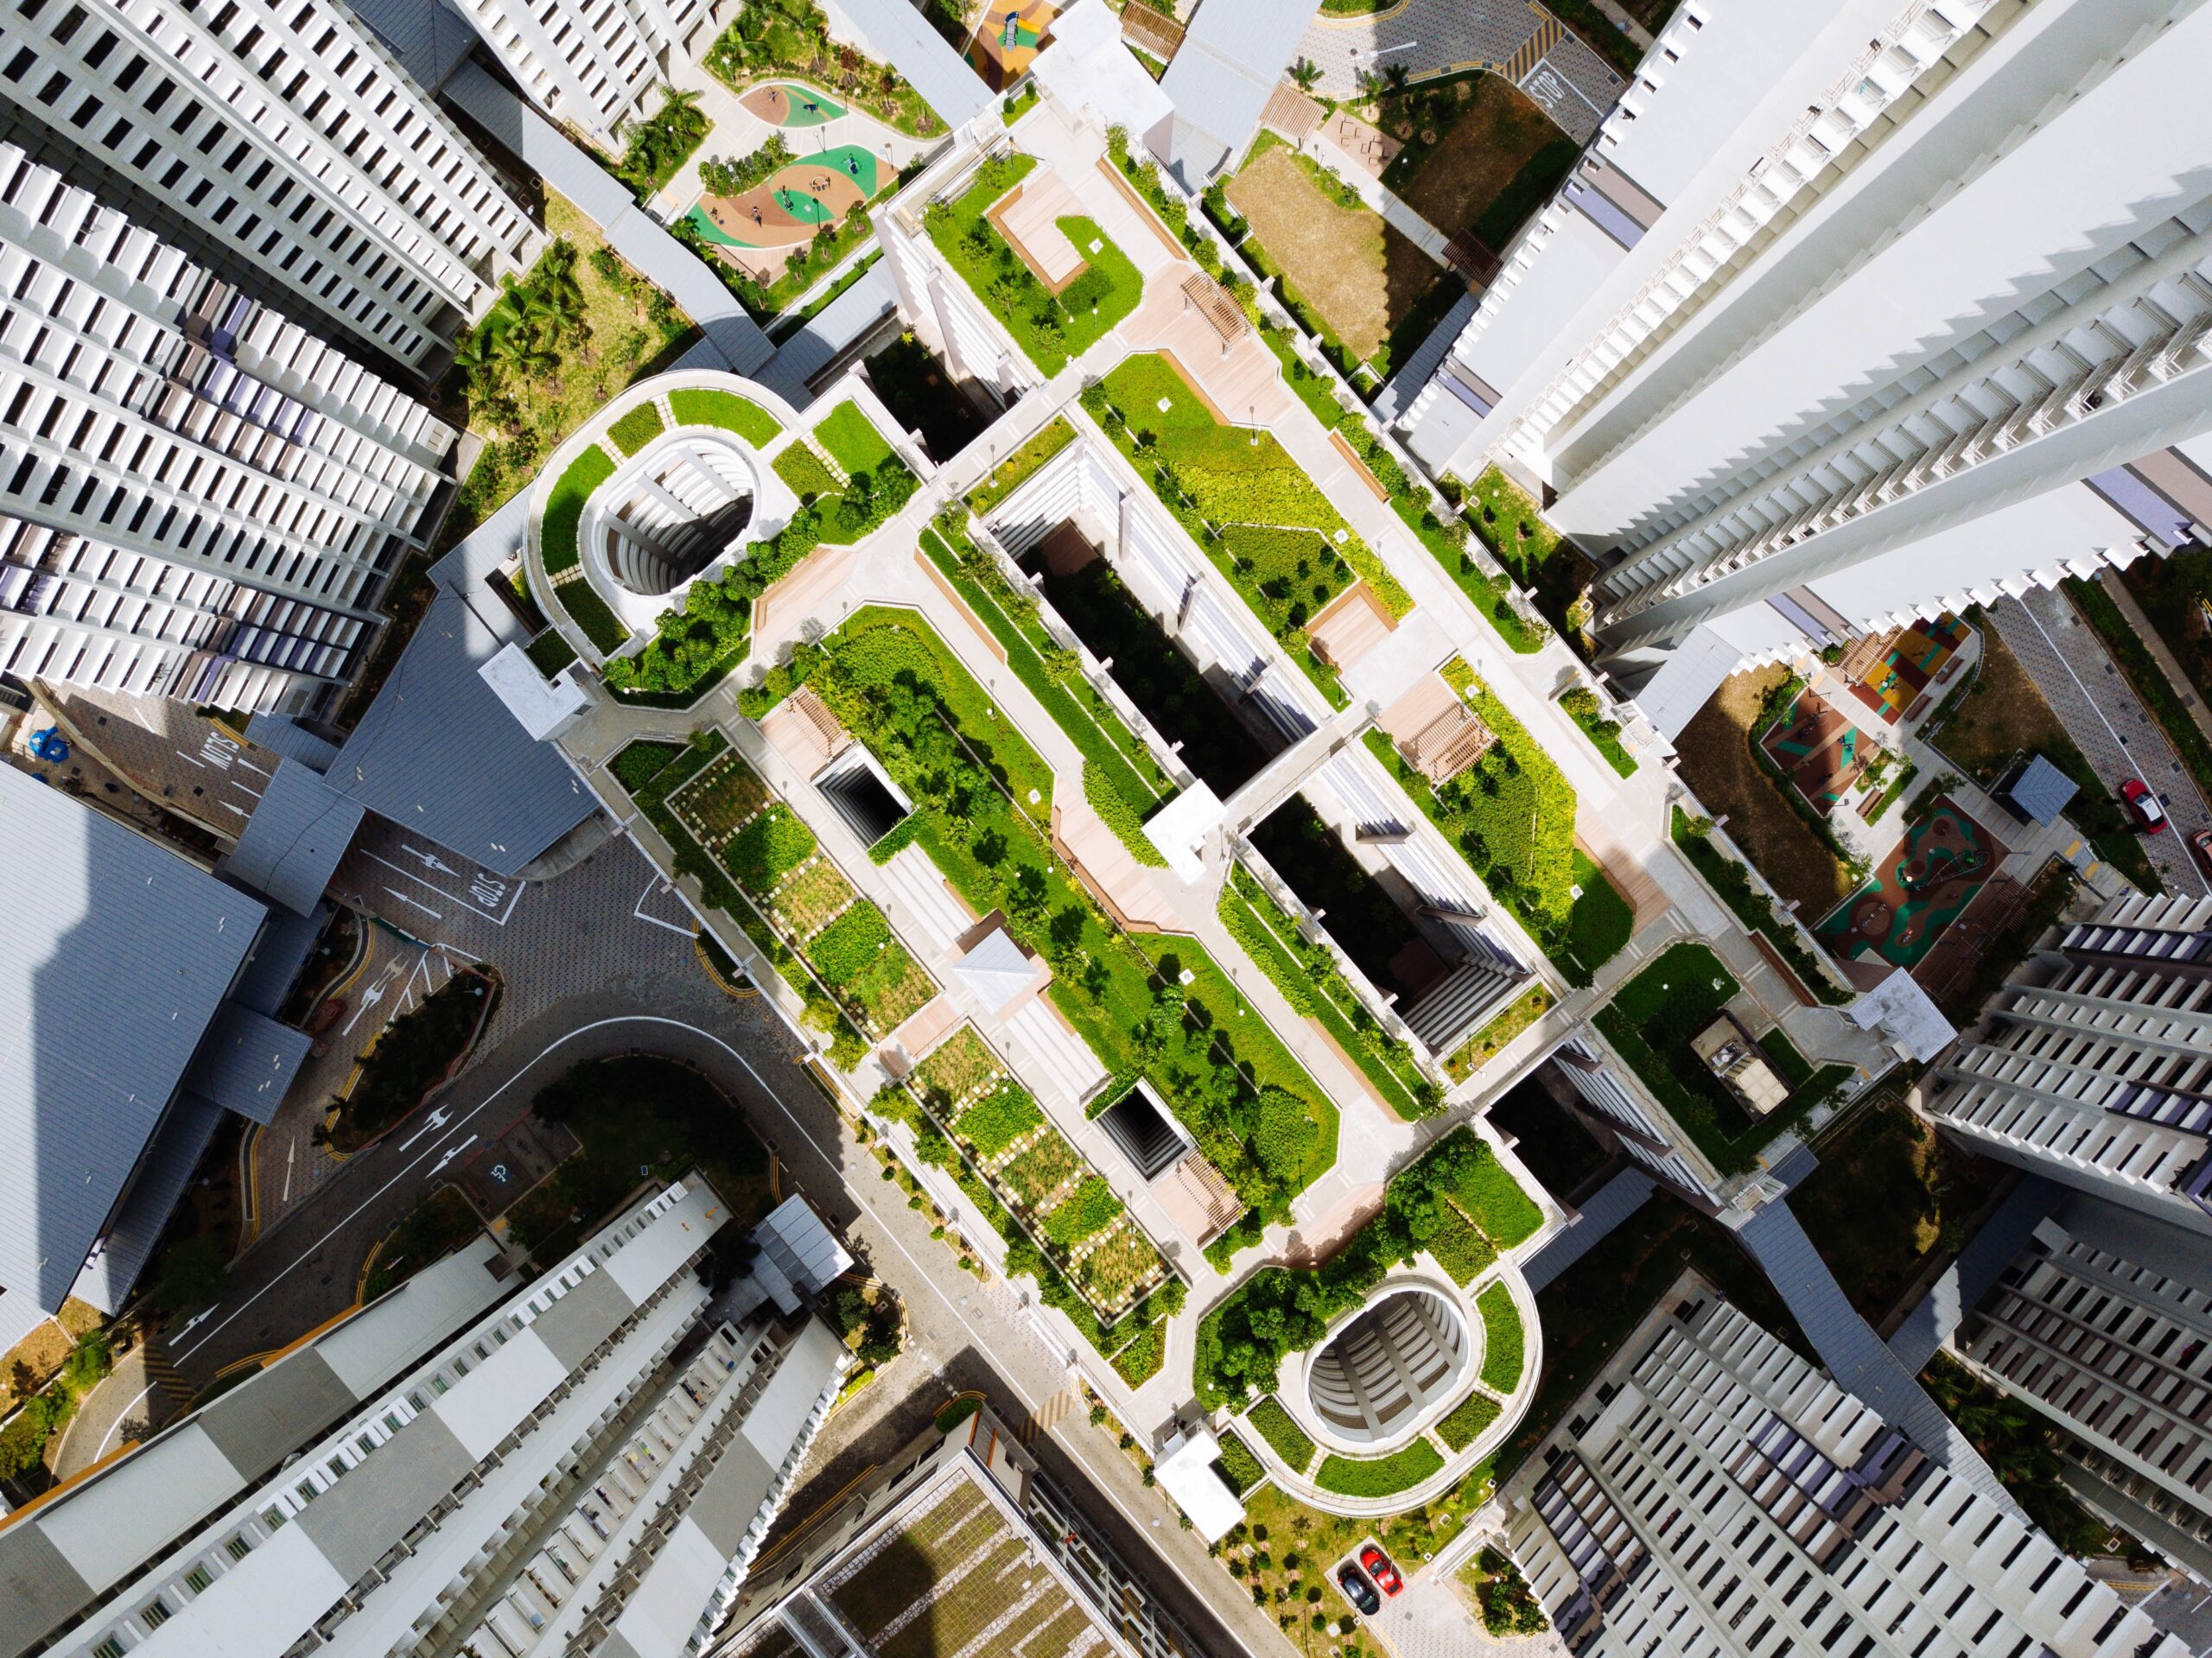 Aerial views of roof terraces. Photo by CHUTTERSNAP via Unsplash